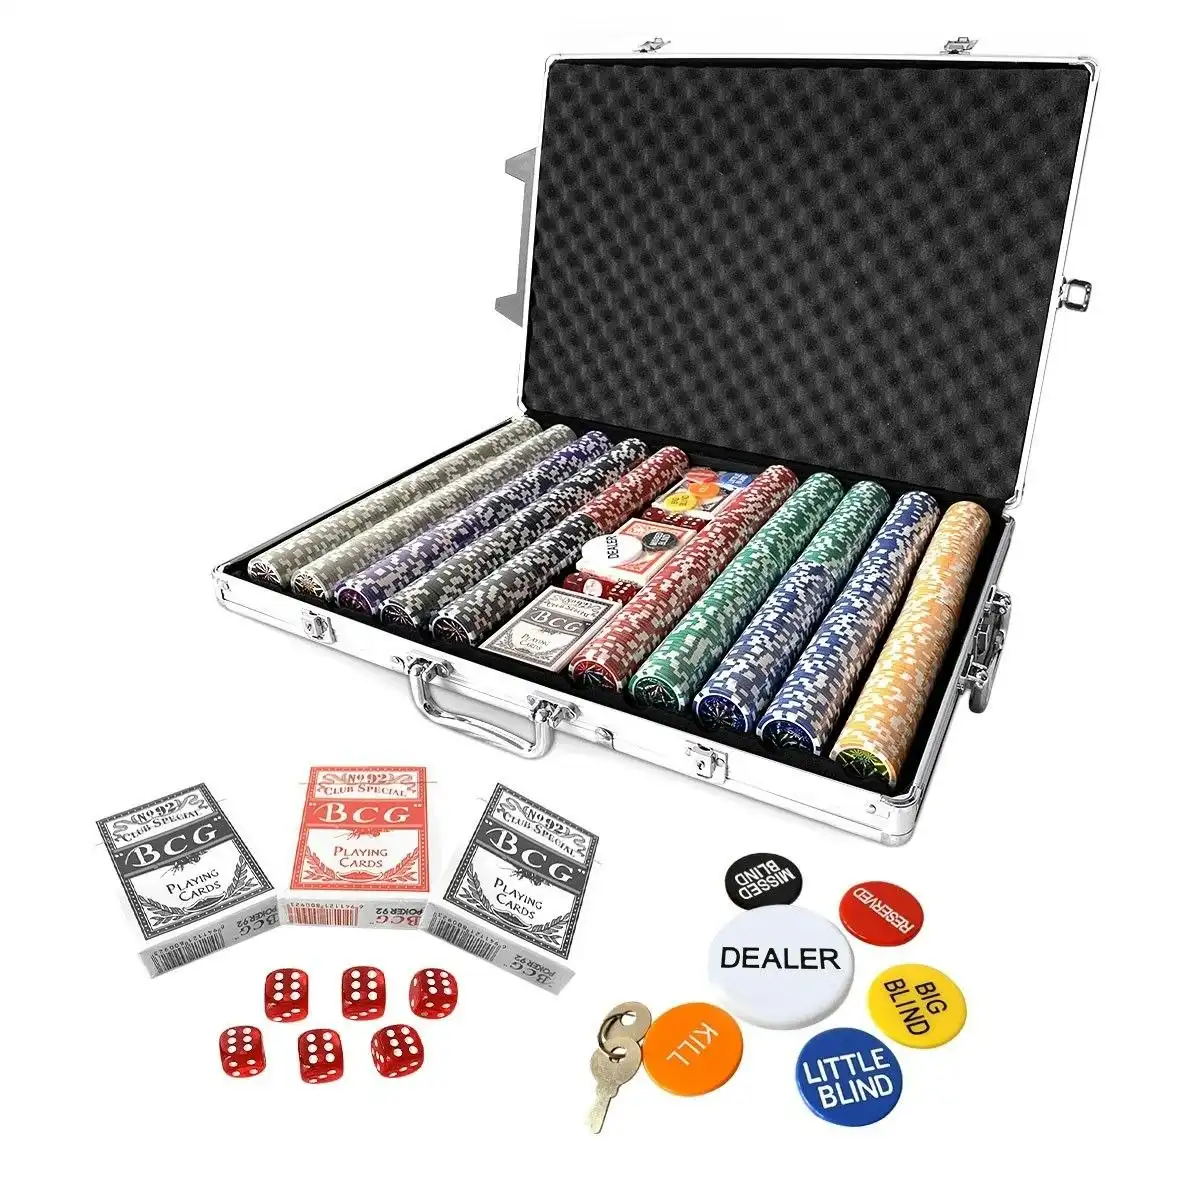 Ausway 1000 Holographic Eagle Chips Professional Poker Card Game Play Set Casino Dice Aluminium Case